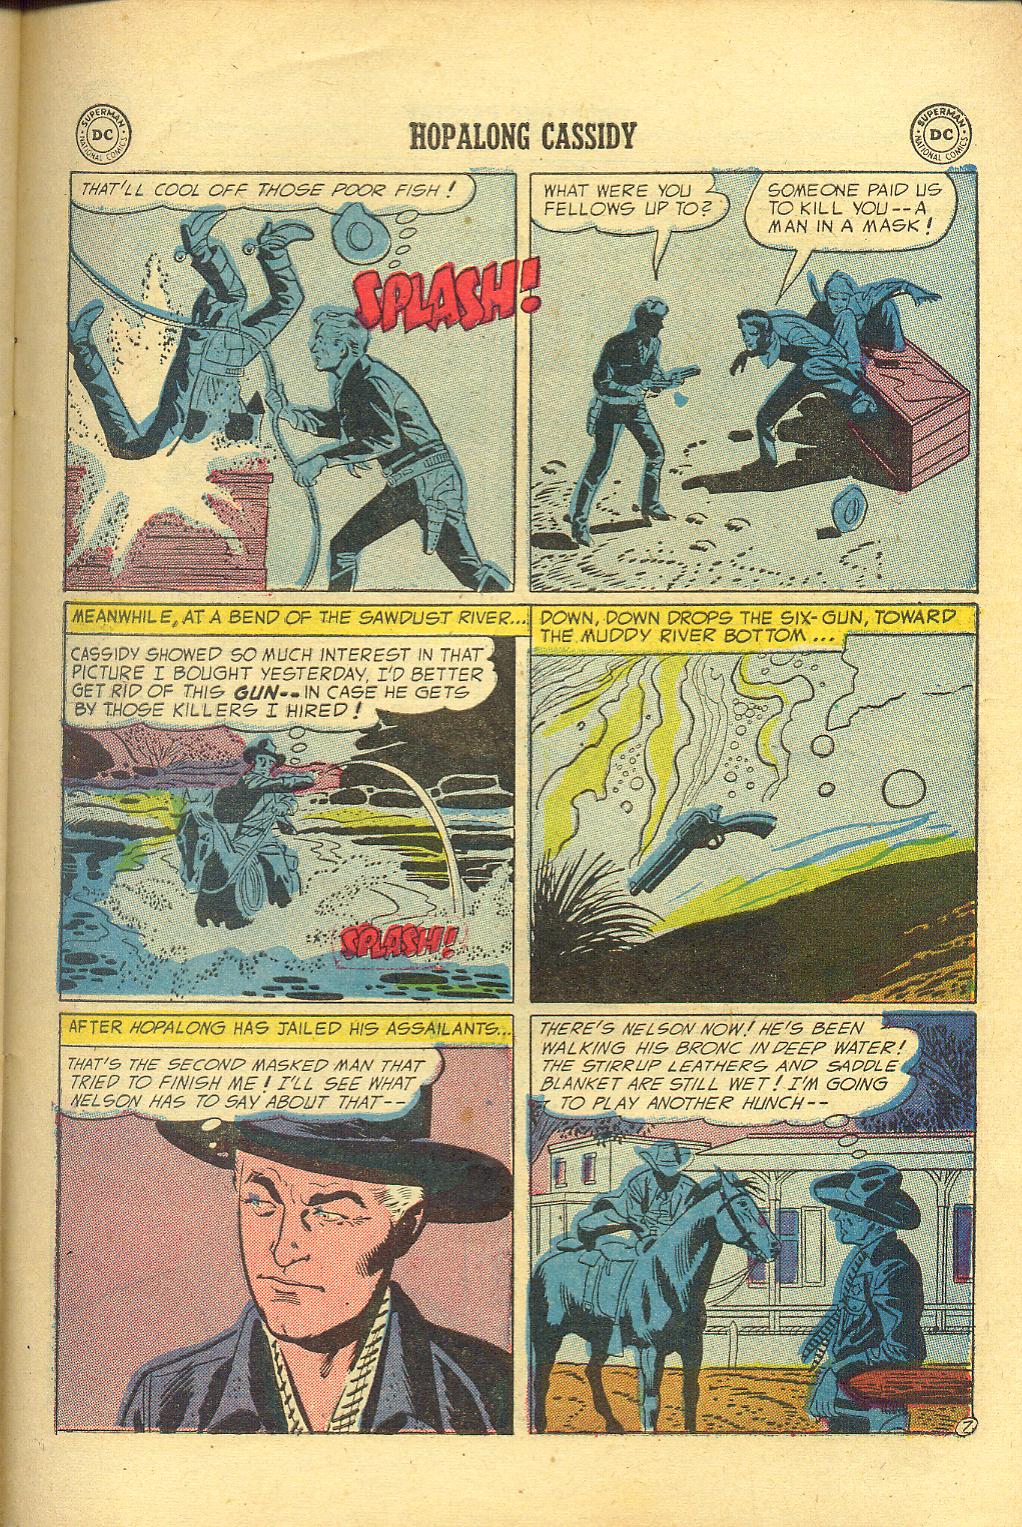 Read online Hopalong Cassidy comic -  Issue #92 - 31